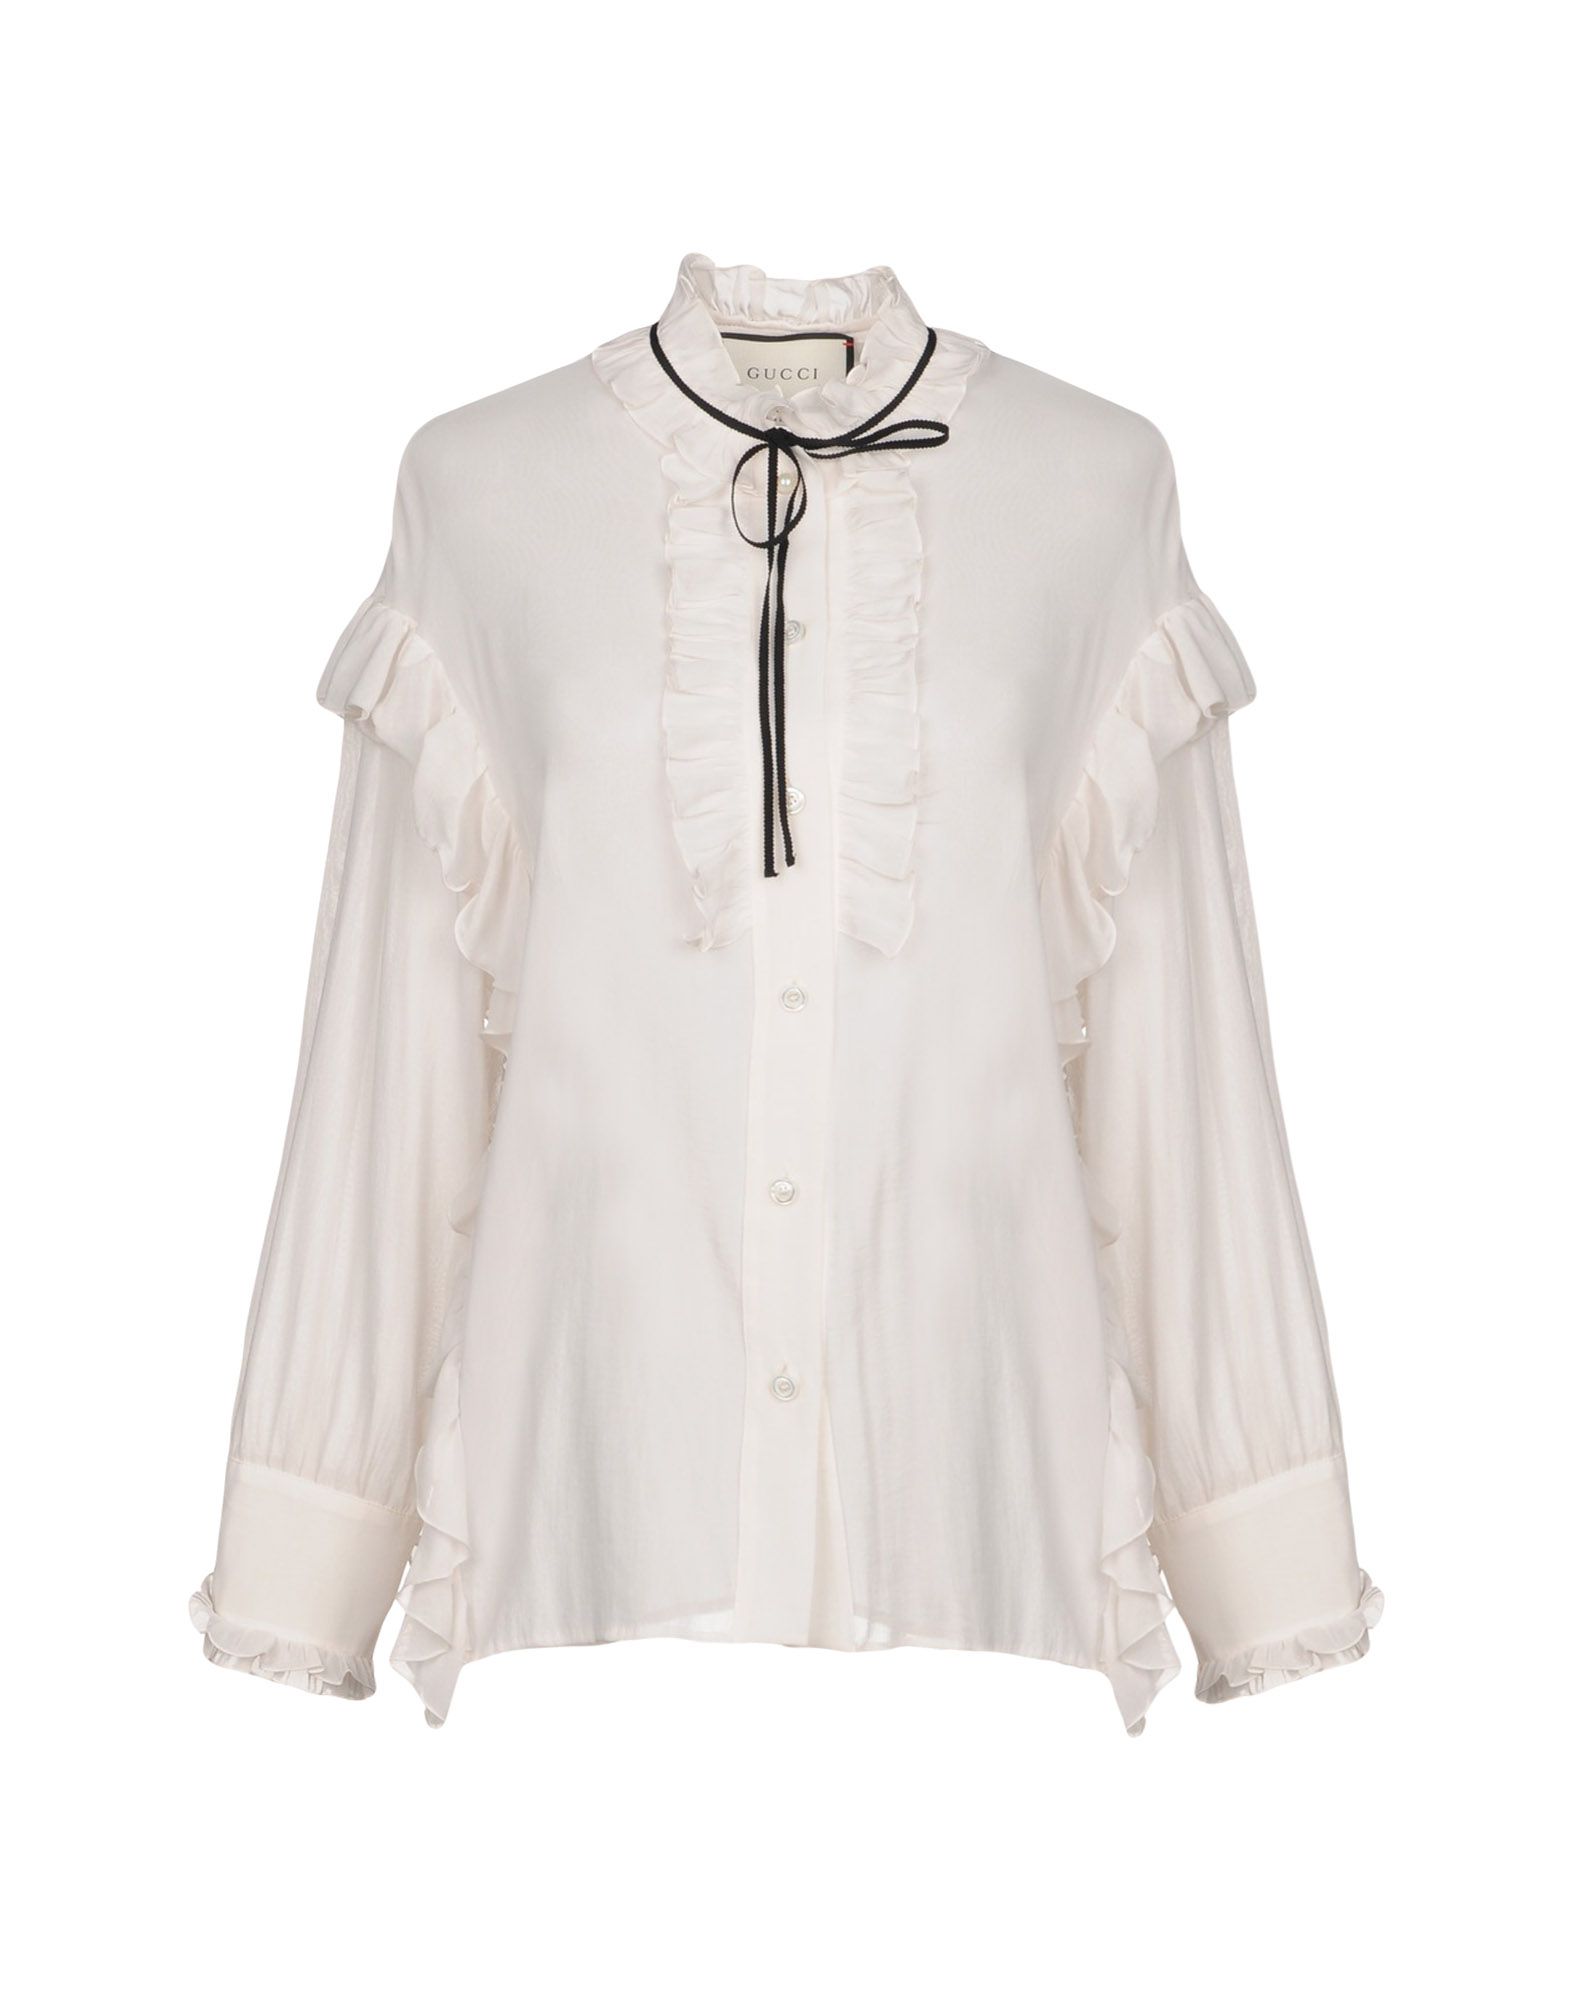 GUCCI Shirts & blouses with bow,38727261XH 3